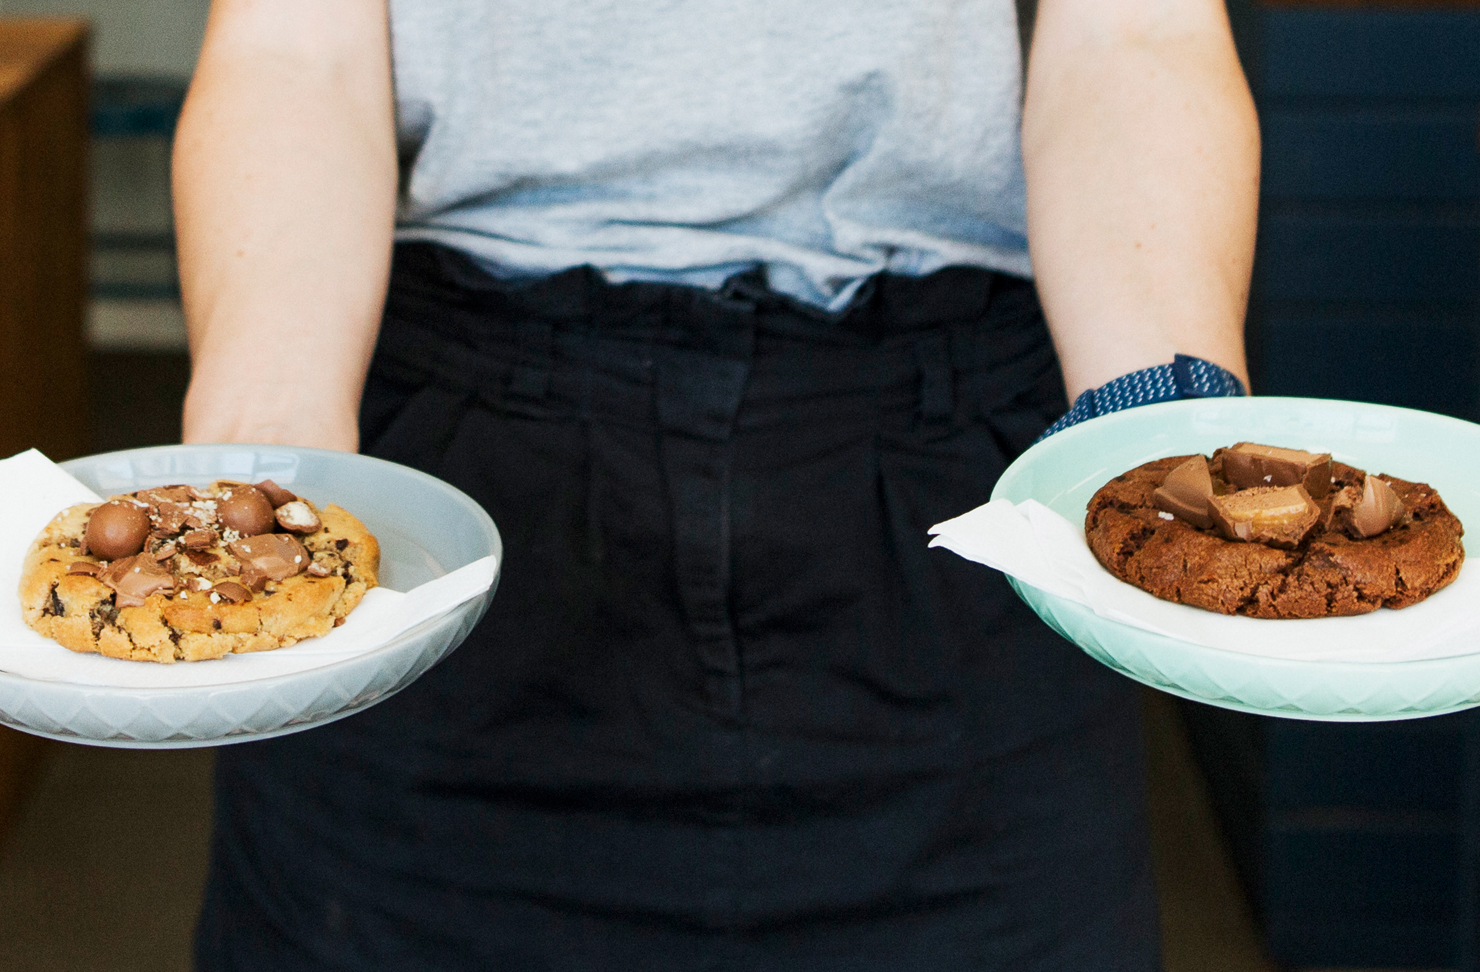 A waitress holds a plate in each hand with a housemade cookie on each.